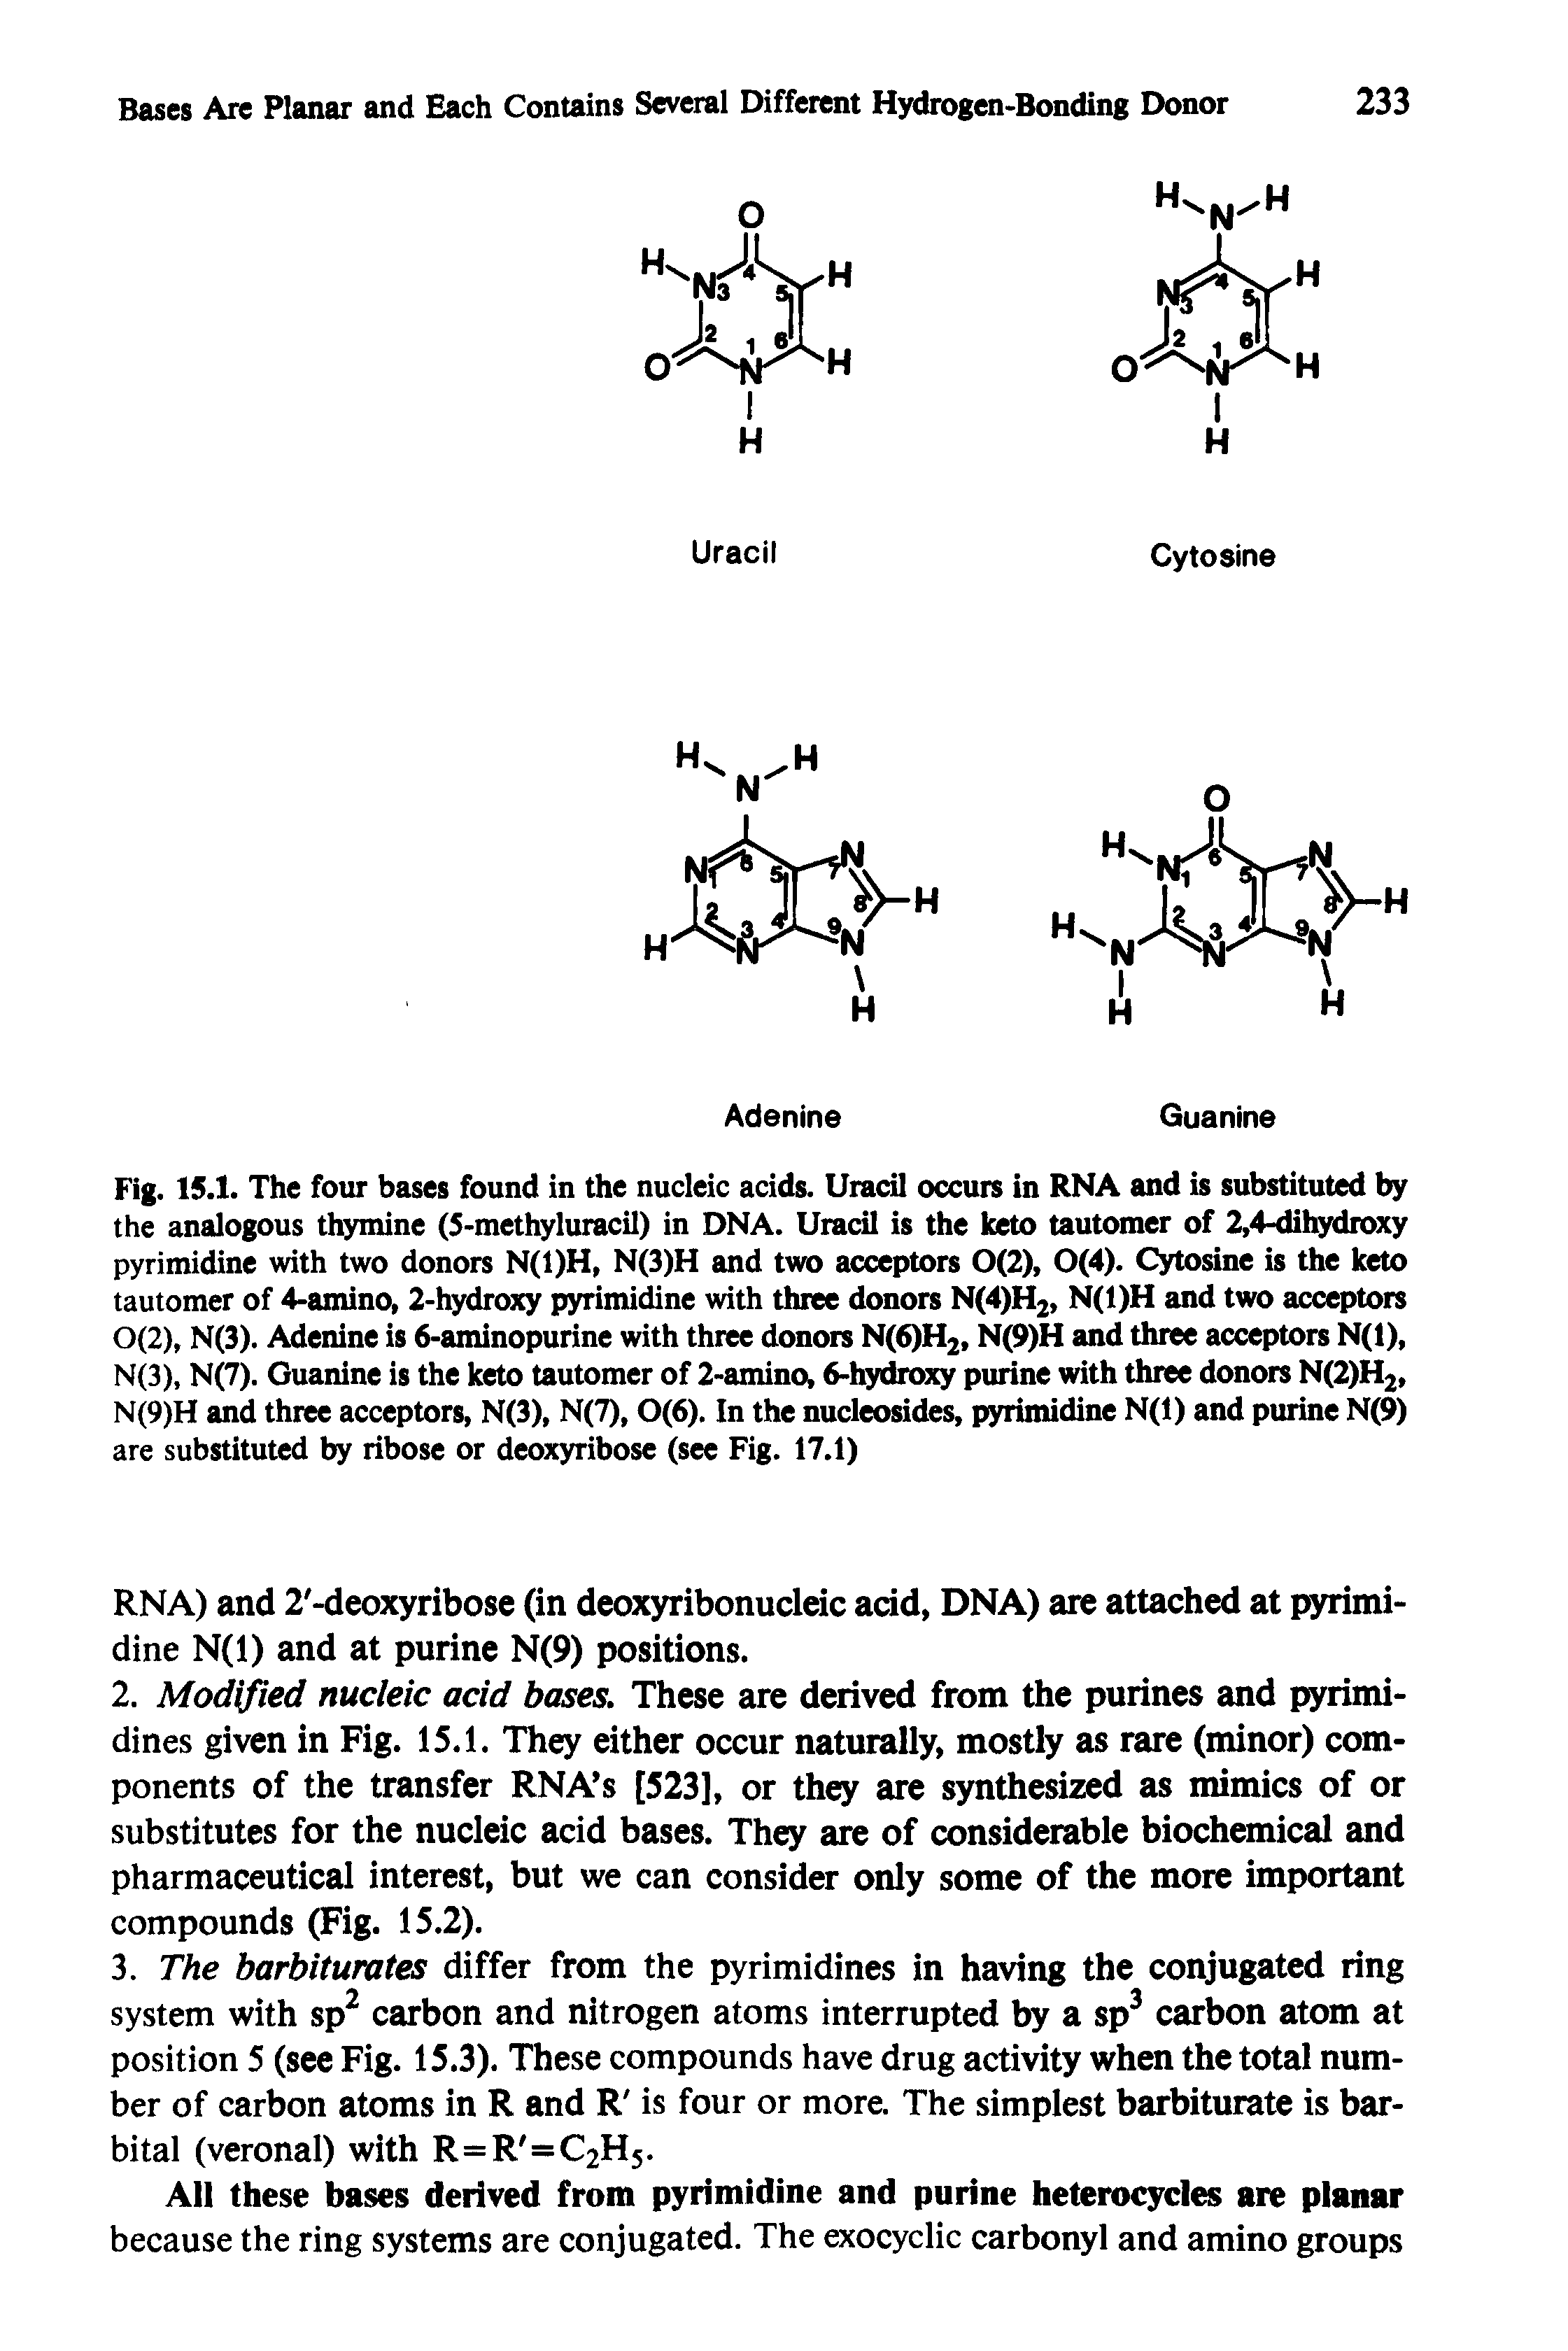 Fig. 15.1. The four bases found in the nucleic acids. Uracil occurs in RNA and is substituted by the analogous thymine (5-methyluracil) in DNA. Uracil is the keto tautomer of 2,4-dihydroxy pyrimidine with two donors N(1)H, N(3)H and two acceptors 0(2), 0(4). Cytosine is the keto tautomer of 4-amino, 2-hydroxy pyrimidine with three donors N(4)H2, N(1)H and two acceptors 0(2), N(3). Adenine is 6-aminopurine with three donors N(6)H2, N(9)H and three acceptors N(l), N(3), N(7). Guanine is the keto tautomer of 2-amino, 6-hydroxy purine with three donors N(2)H2, N(9)H and three acceptors, N(3), N(7), 0(6). In the nucleosides, pyrimidine N(l) and purine N(9) are substituted by ribose or deoxyribose (see Fig. 17.1)...